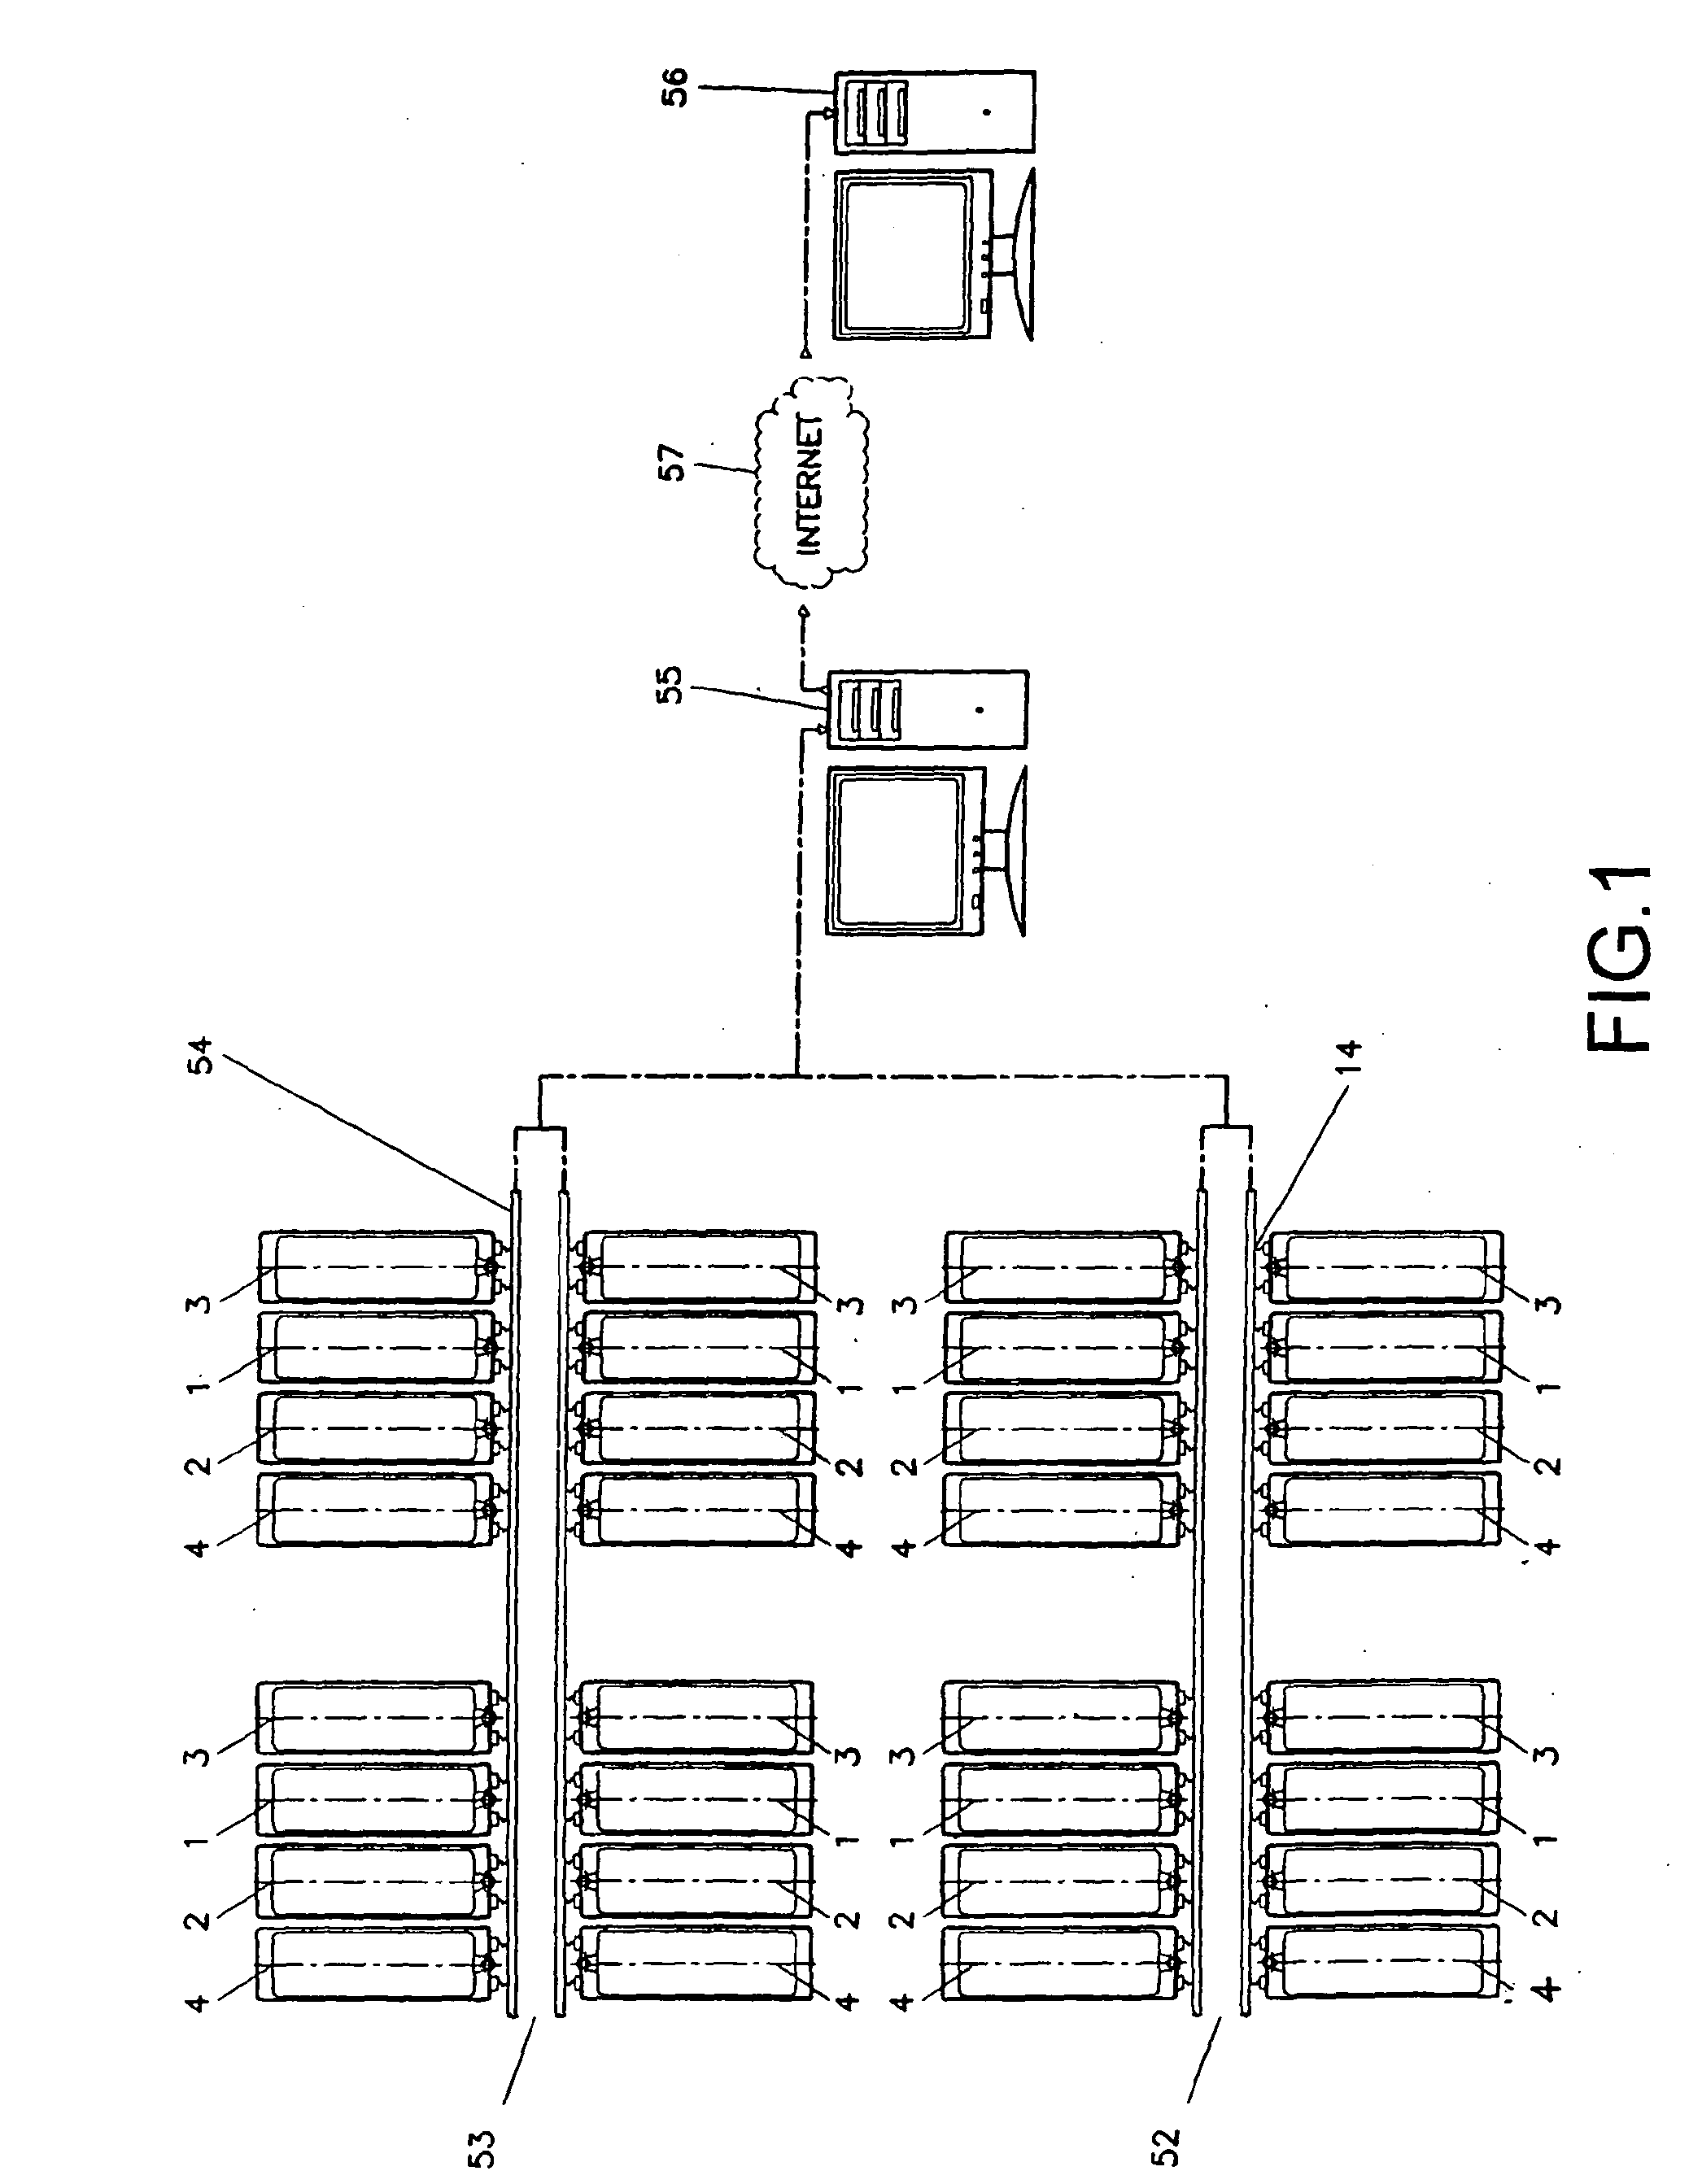 System for monitoring, control, and management of a plant where hydrometallurgical electrowinning and electrorefining processes for non ferrous metals.